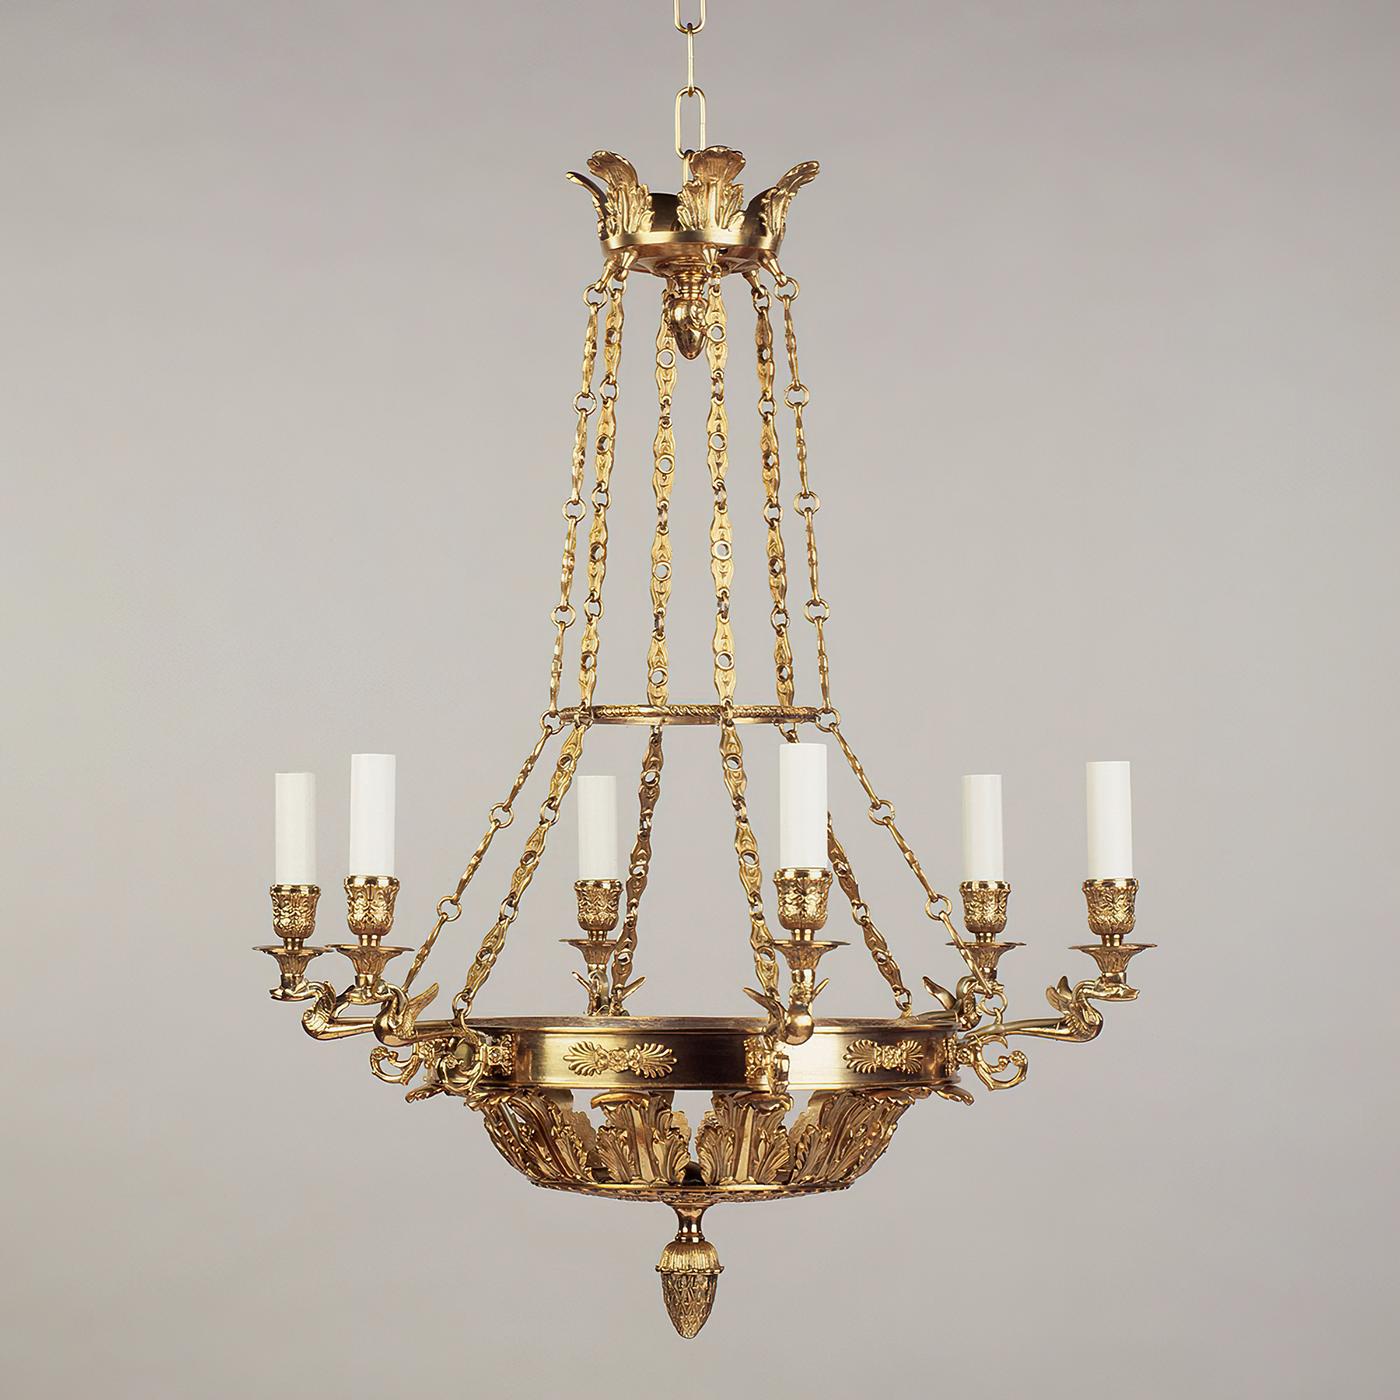 Fontainebleau Empire chandelier, based on a 19th-century French design, the arrangement of the chains and the elaborate cast brass details make this design distinctive. A gilt finish, with acanthus leaves, ornate details, swan form arms and palmette